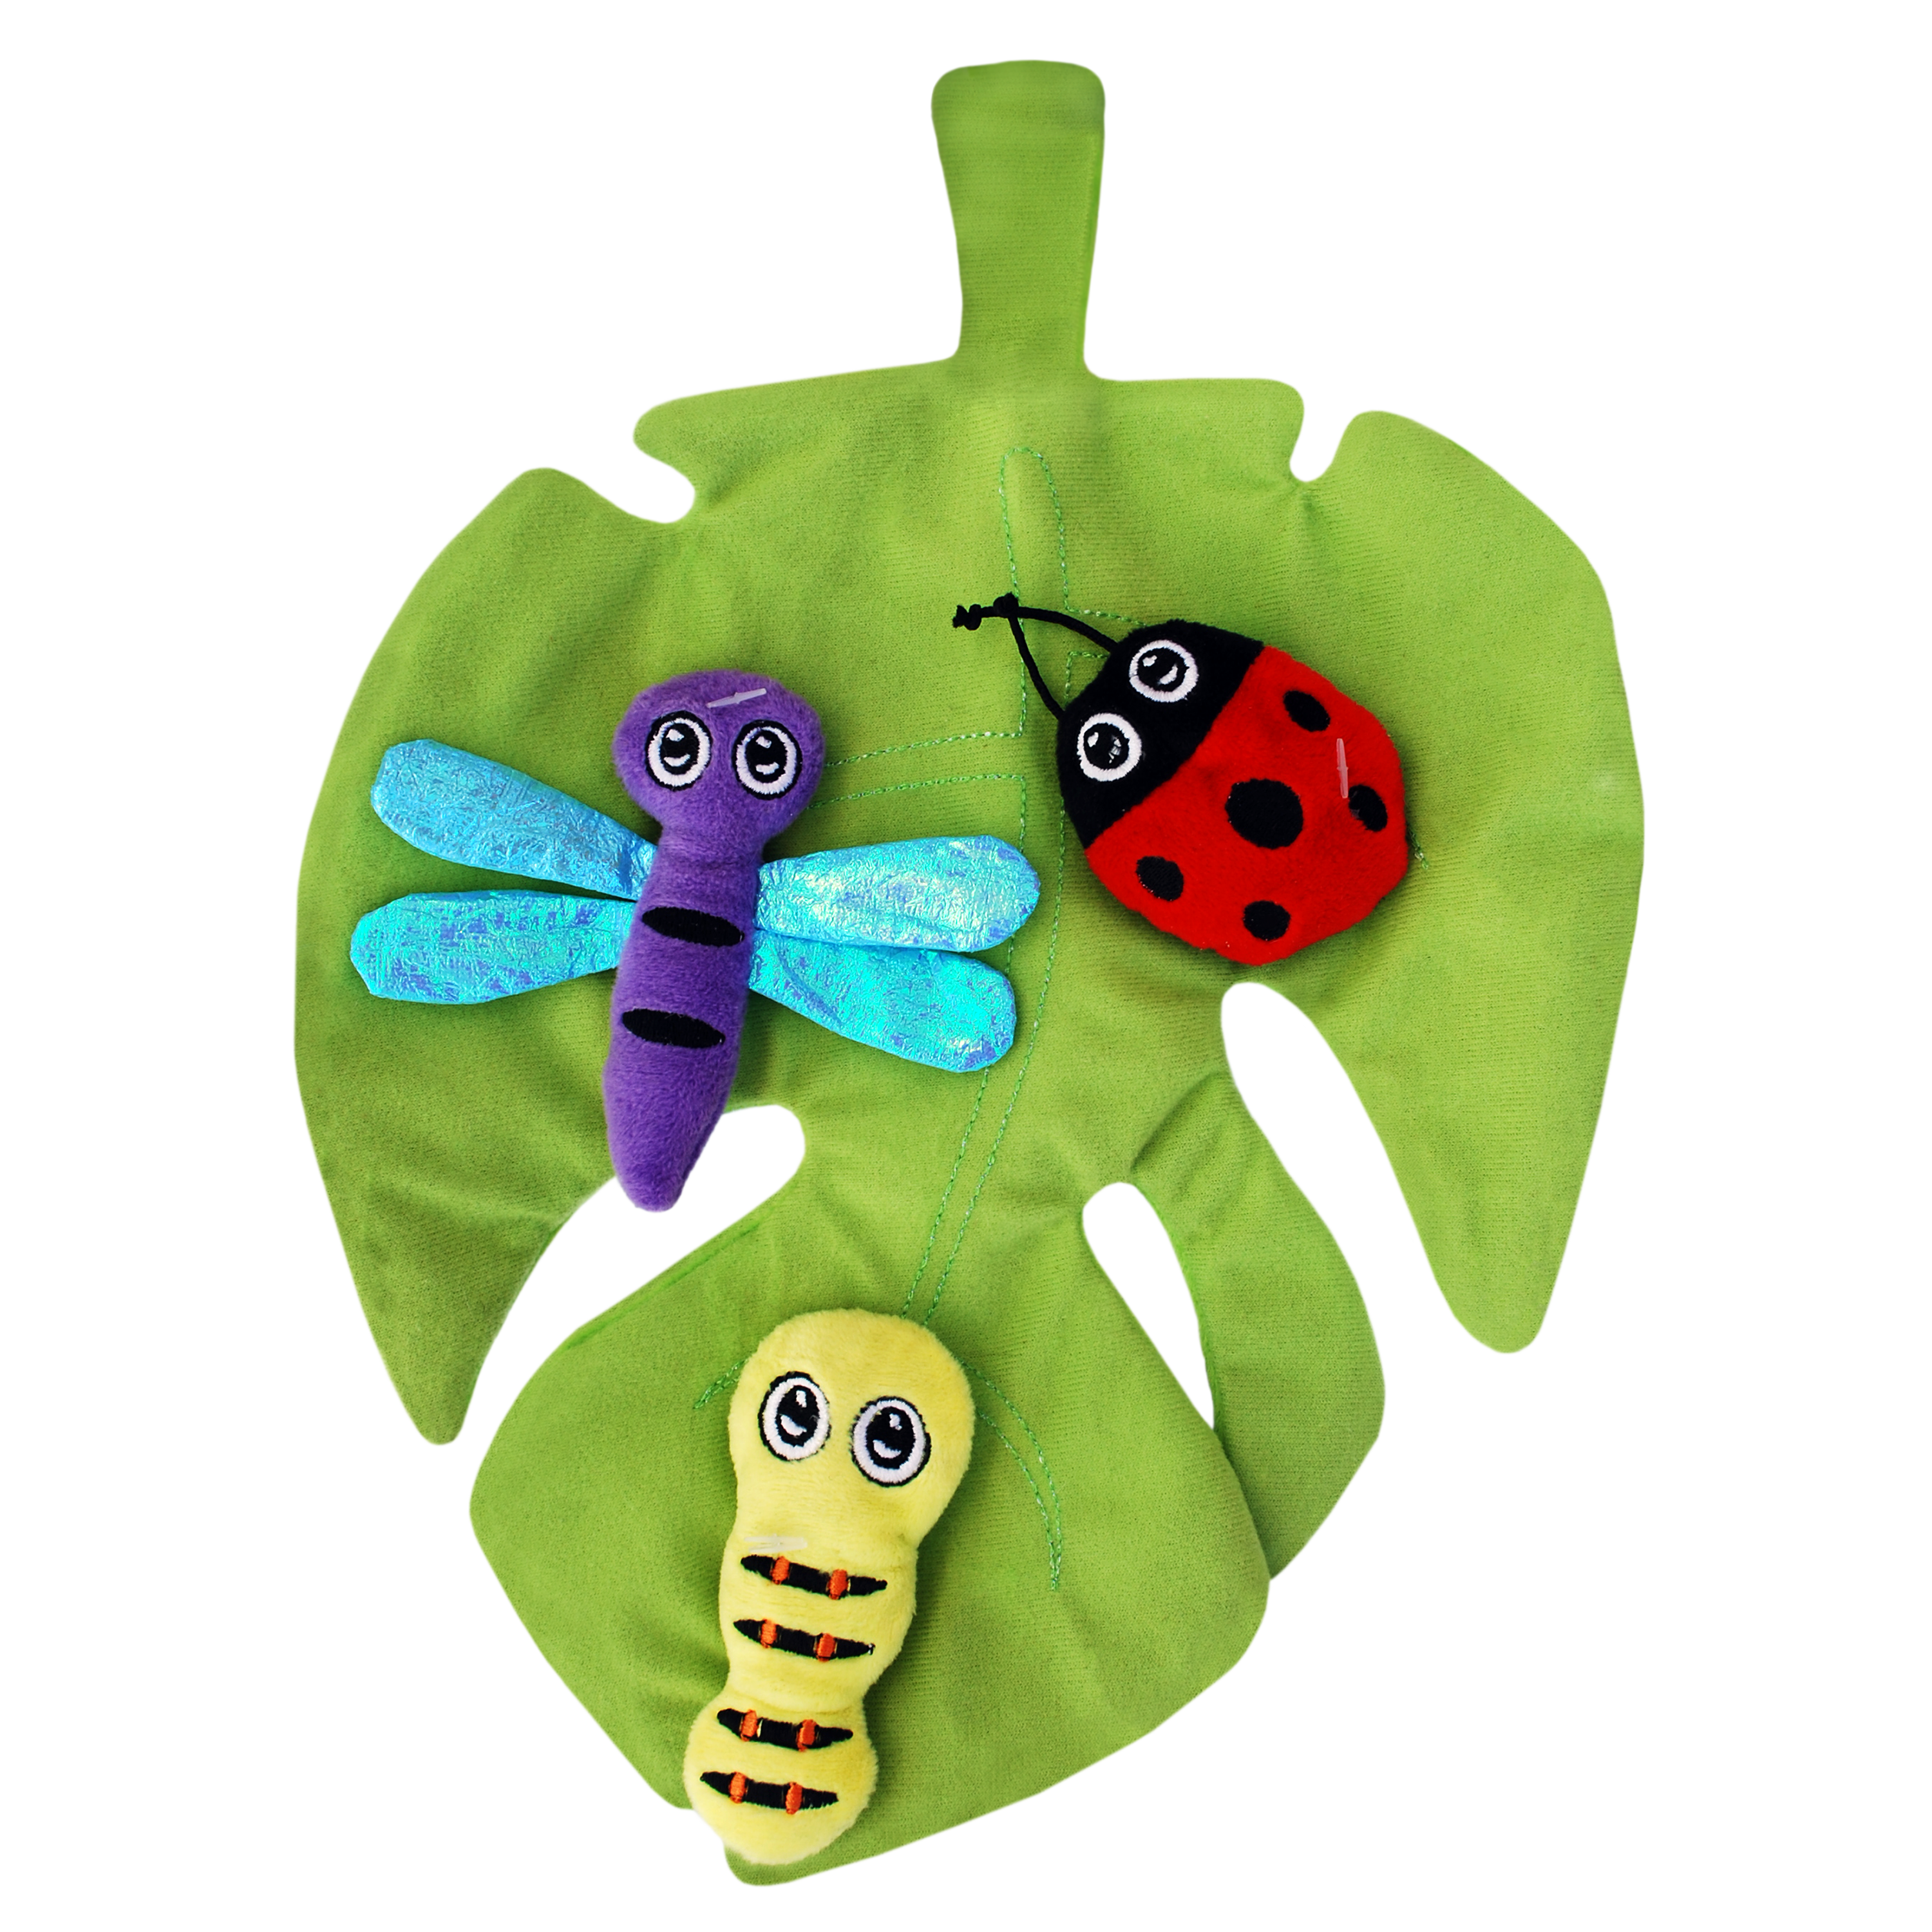 Pull-A-Partz Bugz offpack product image